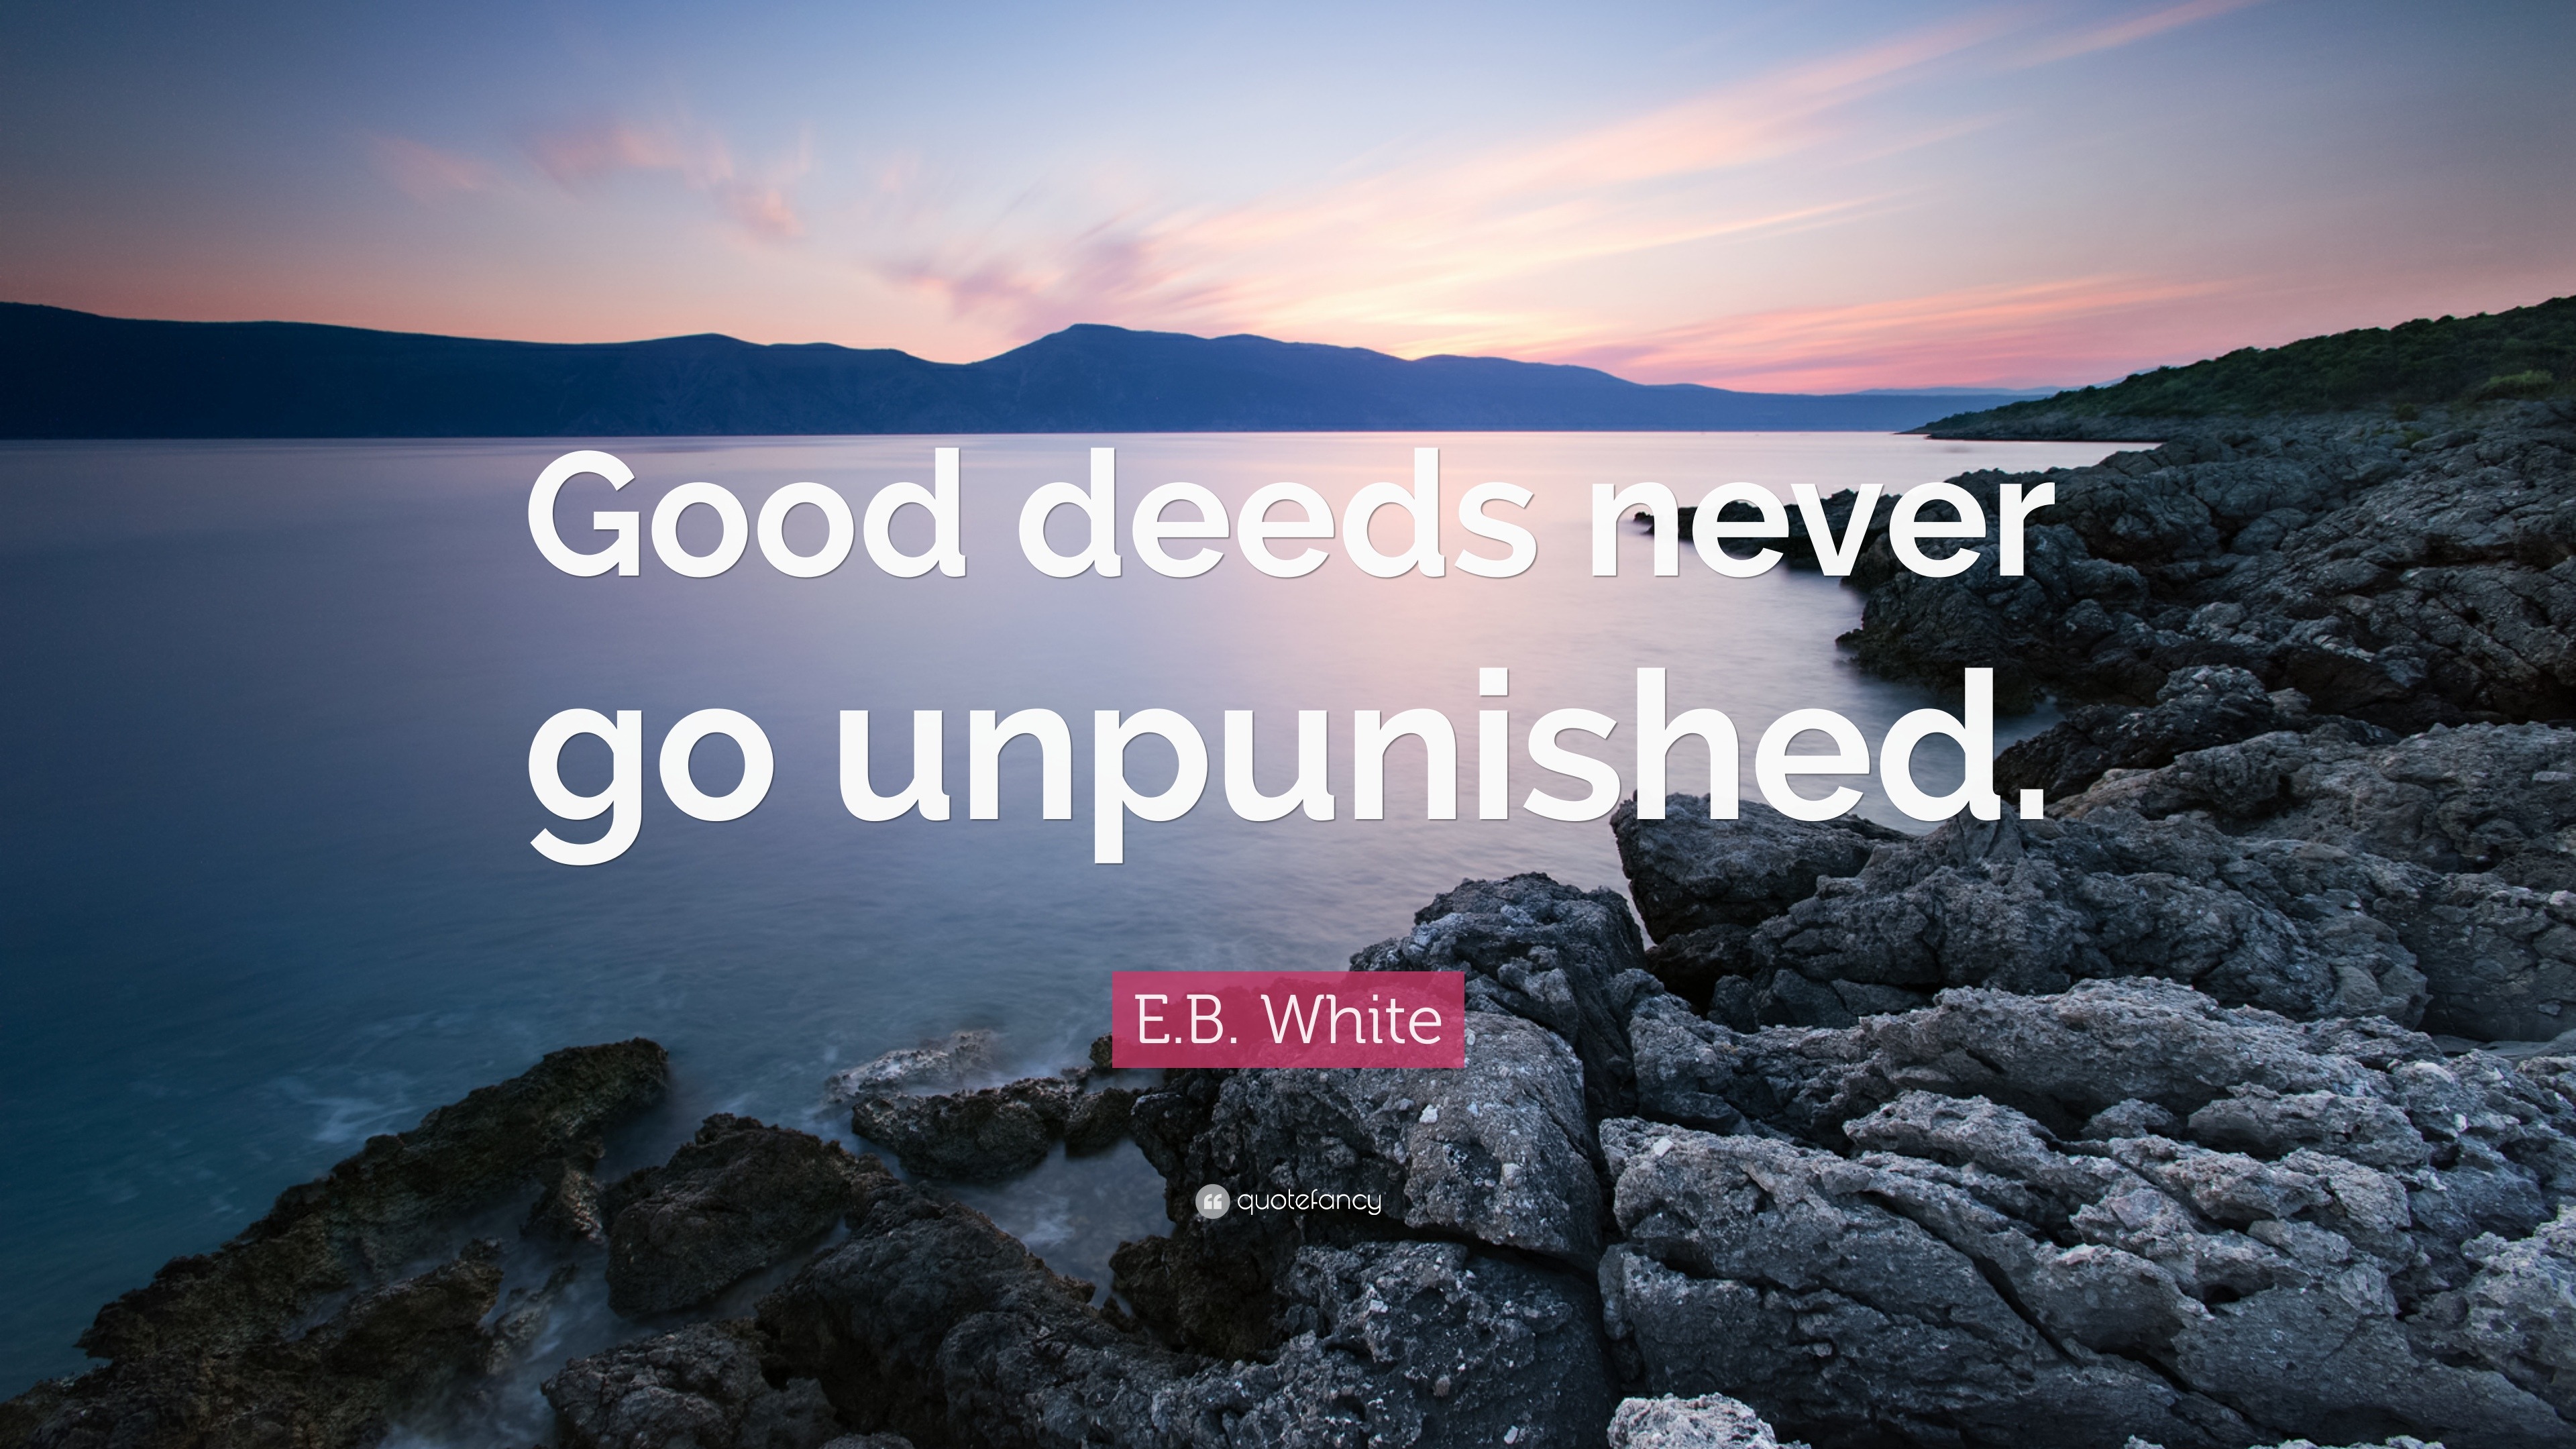 no good deed goes unpunished quote